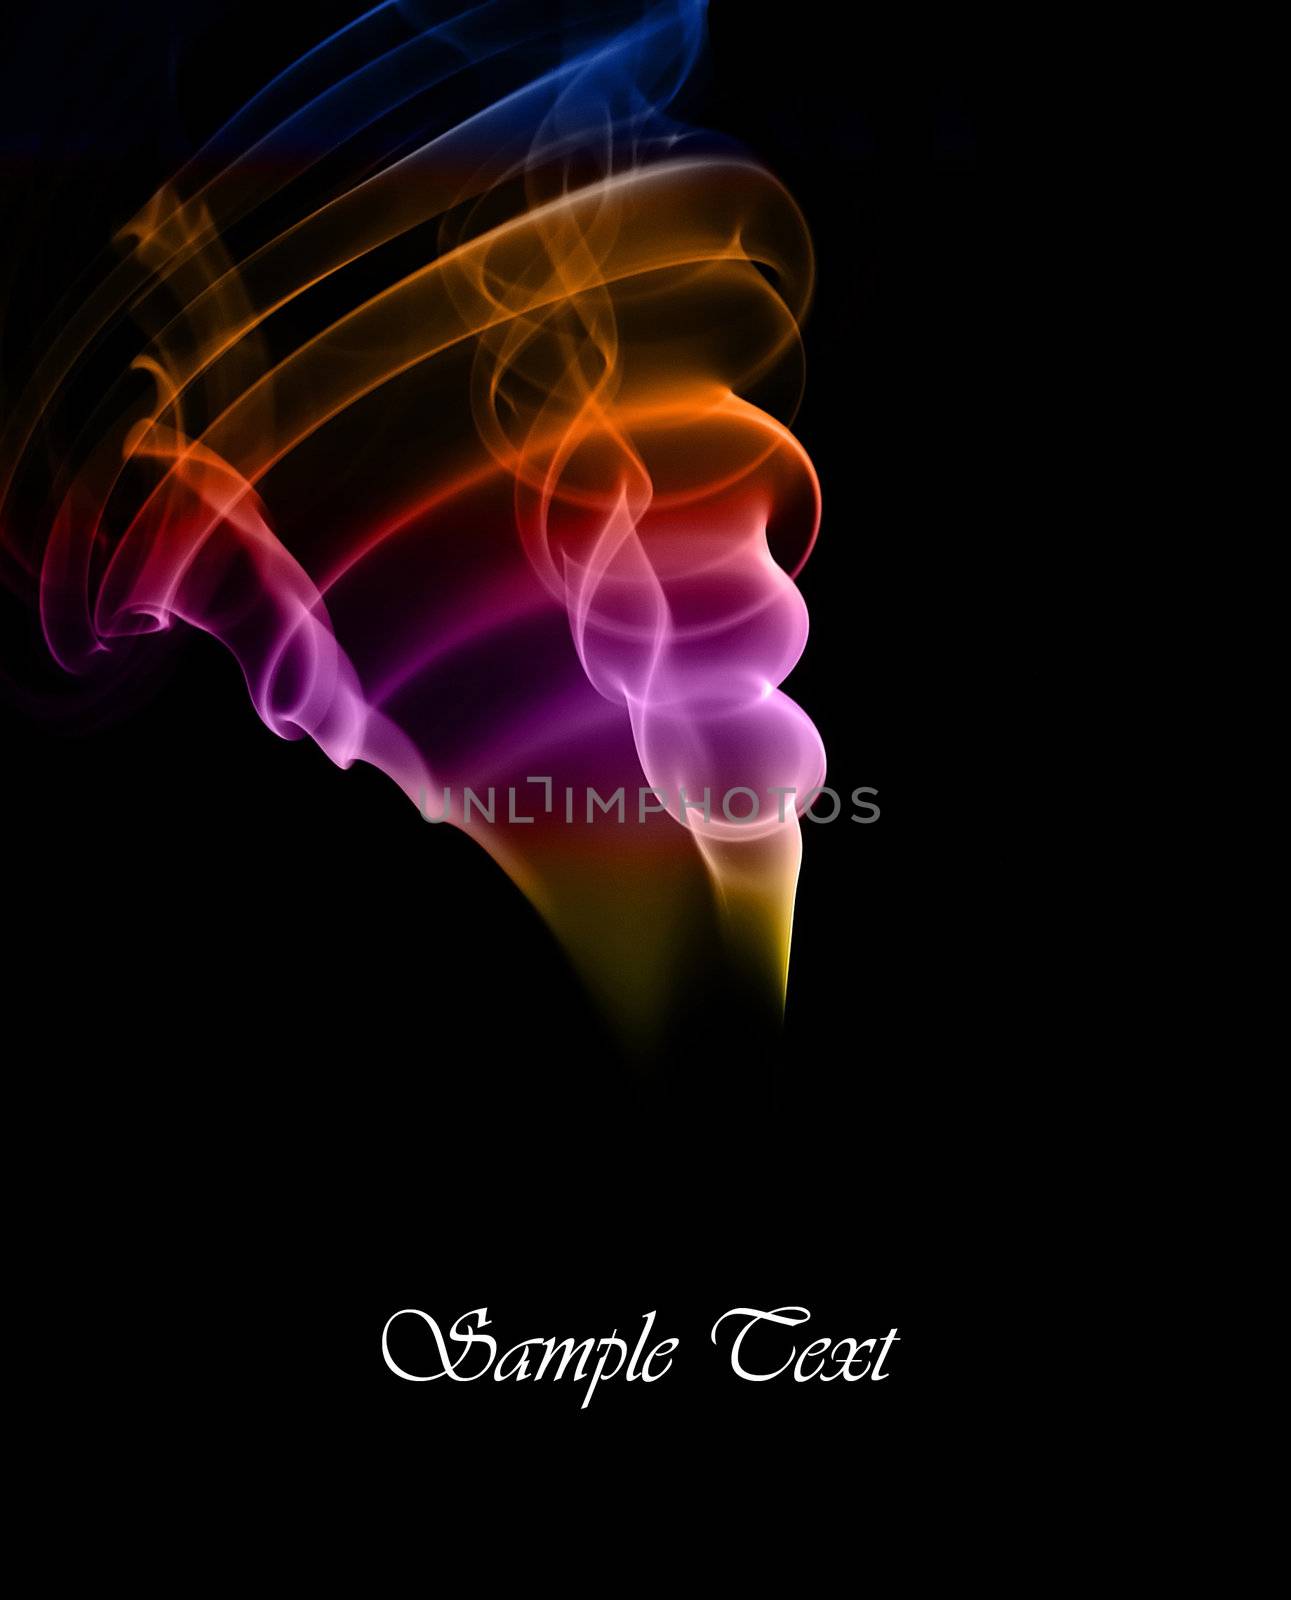 Beautiful abstract colorful image with smoke patterns